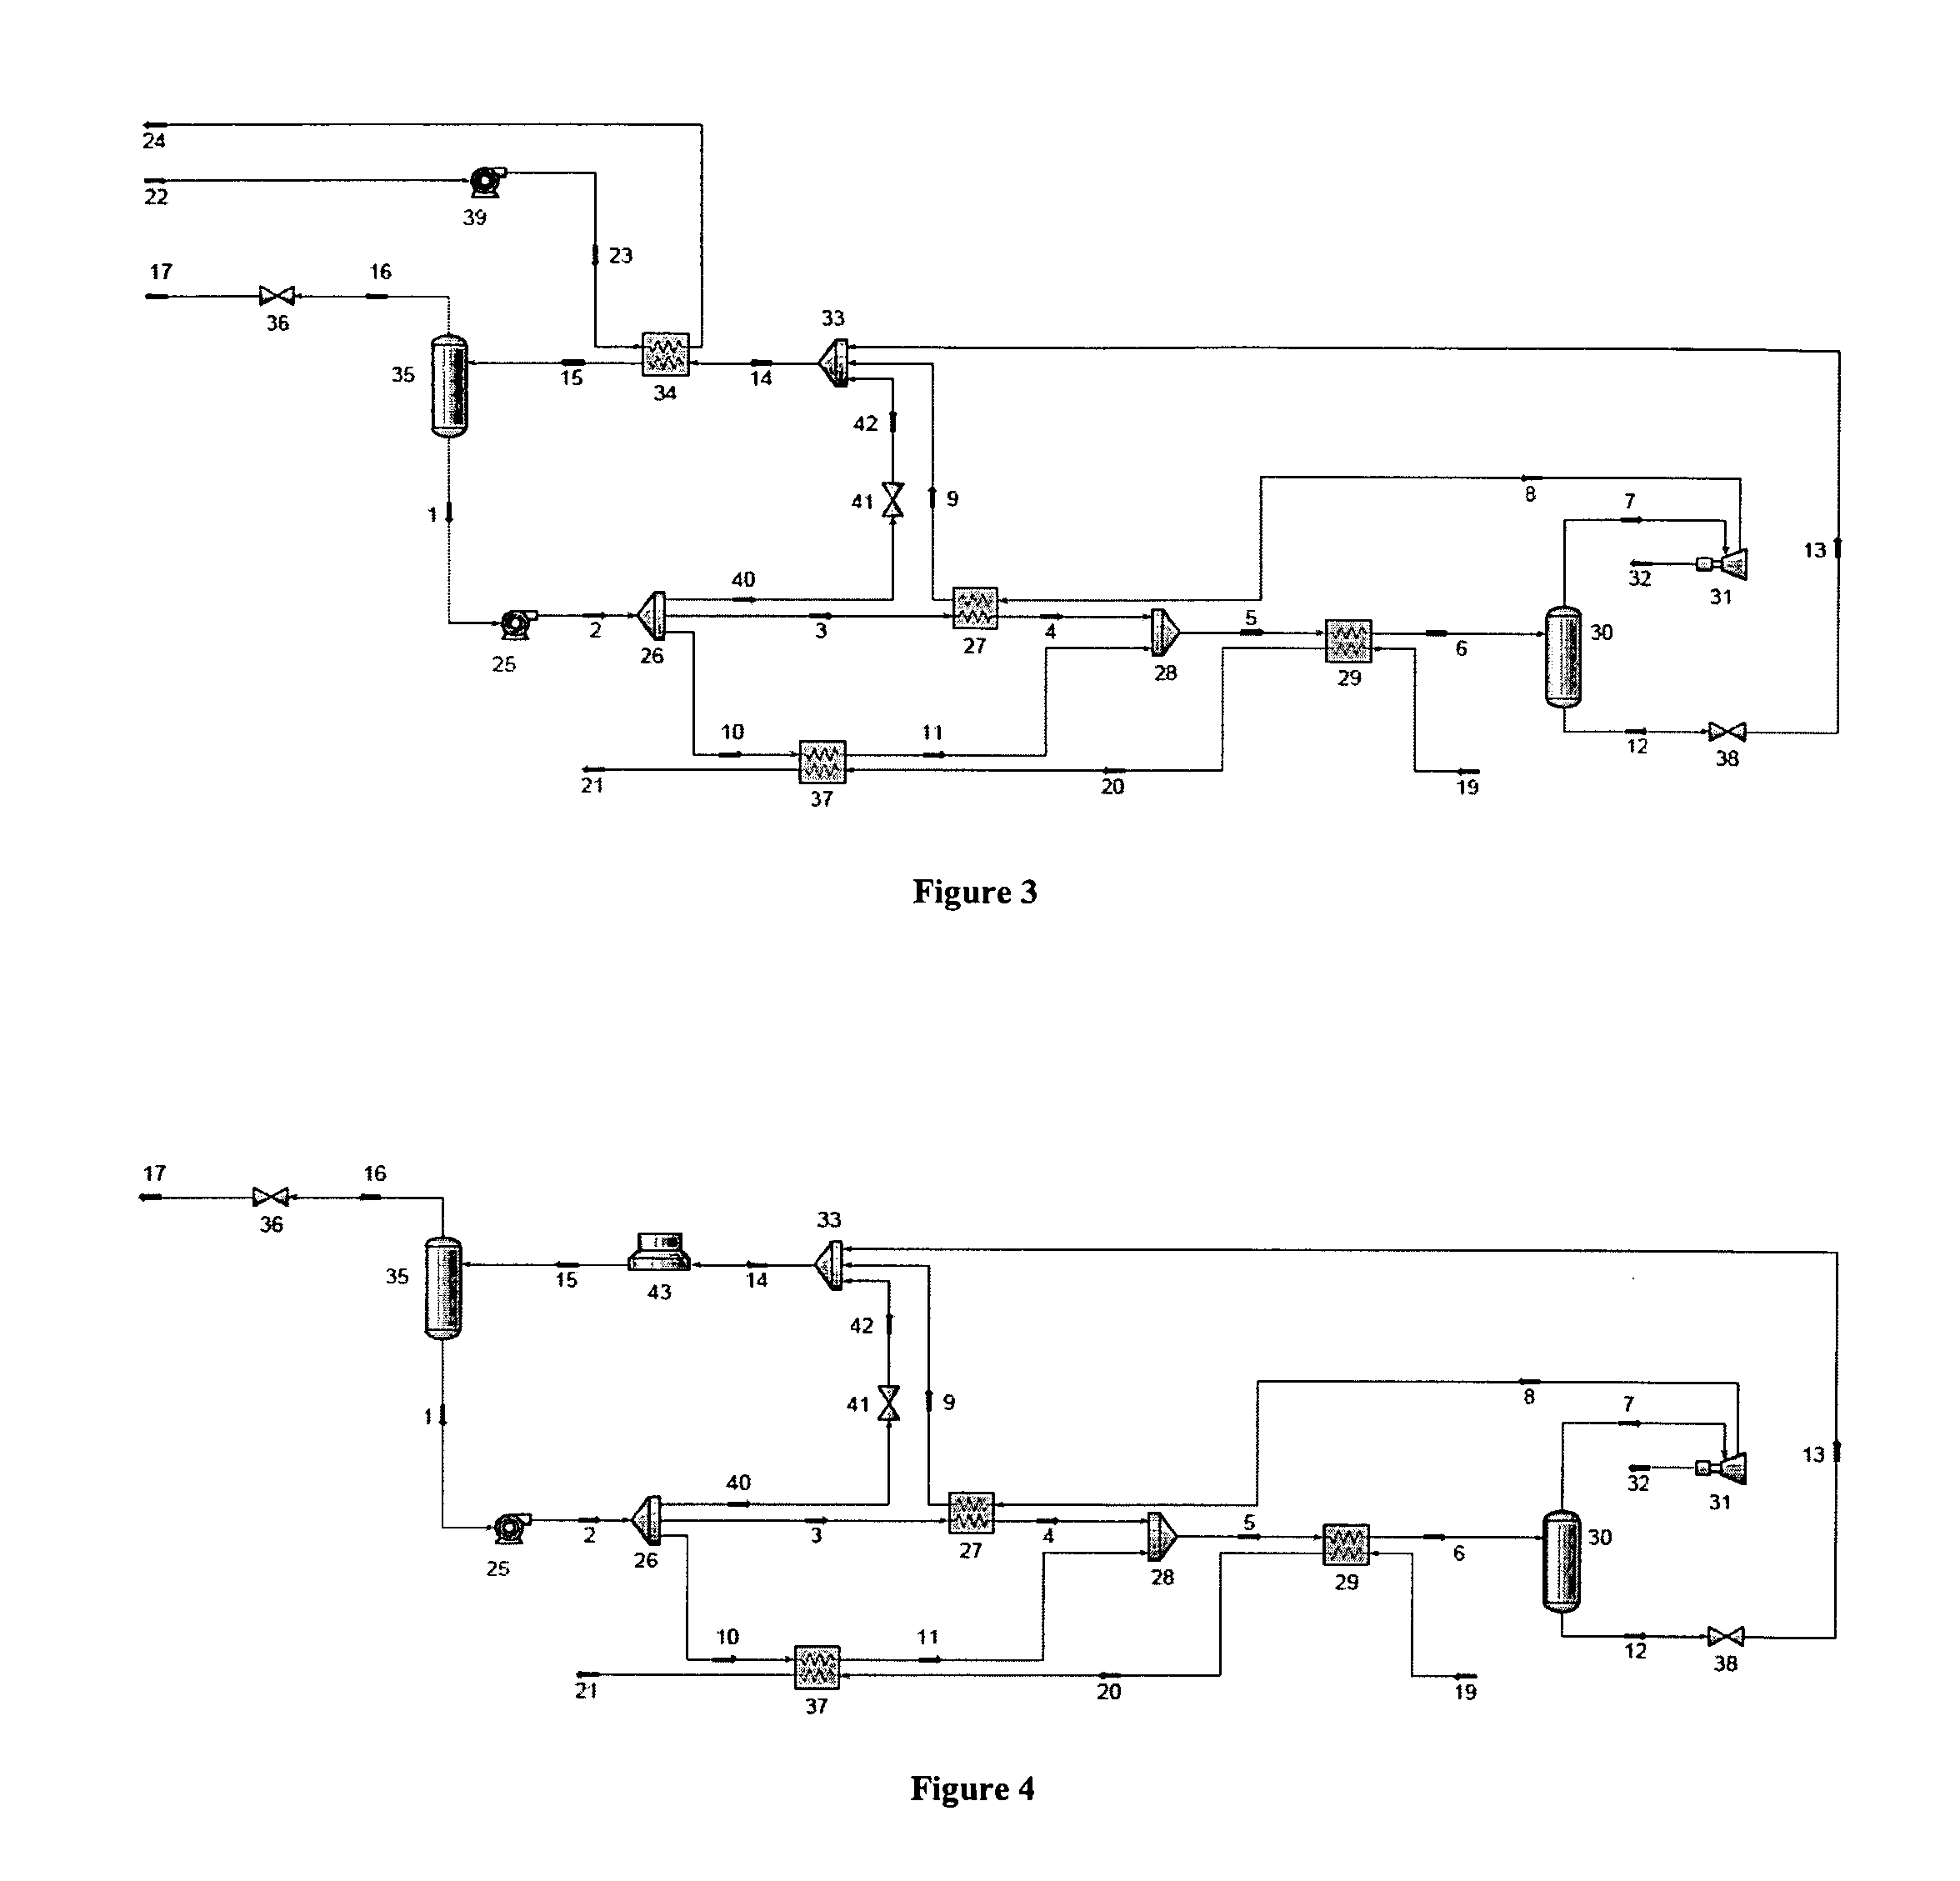 Power recovery and energy conversion systems and methods of using same